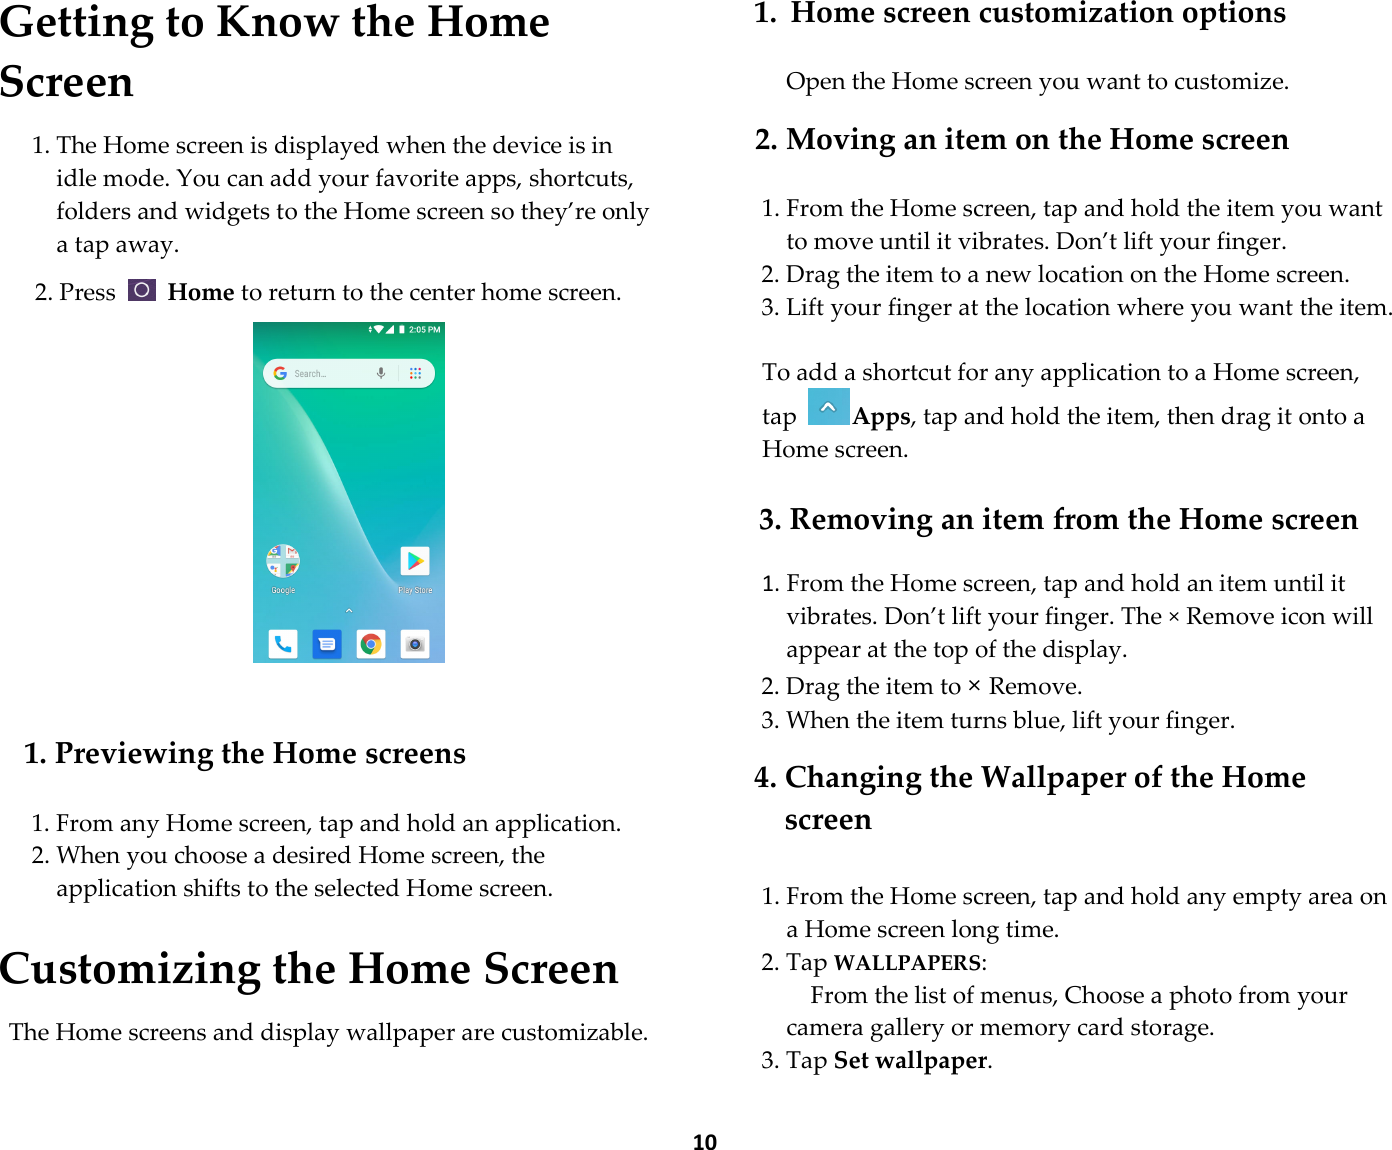  10 Getting to Know the Home Screen  1. The Home screen is displayed when the device is in idle mode. You can add your favorite apps, shortcuts, folders and widgets to the Home screen so they’re only a tap away.  2. Press   Home to return to the center home screen.            1. Previewing the Home screens  1. From any Home screen, tap and hold an application. 2. When you choose a desired Home screen, the application shifts to the selected Home screen.  Customizing the Home Screen  The Home screens and display wallpaper are customizable.  1. Home screen customization options  Open the Home screen you want to customize.  2. Moving an item on the Home screen  1. From the Home screen, tap and hold the item you want to move until it vibrates. Don’t lift your finger. 2. Drag the item to a new location on the Home screen. 3. Lift your finger at the location where you want the item.  To add a shortcut for any application to a Home screen, tap Apps, tap and hold the item, then drag it onto a Home screen.  3. Removing an item from the Home screen  1. From the Home screen, tap and hold an item until it vibrates. Don’t lift your finger. The × Remove icon will appear at the top of the display. 2. Drag the item to × Remove. 3. When the item turns blue, lift your finger.  4. Changing the Wallpaper of the Home screen  1. From the Home screen, tap and hold any empty area on a Home screen long time. 2. Tap WALLPAPERS:         From the list of menus, Choose a photo from your camera gallery or memory card storage. 3. Tap Set wallpaper.